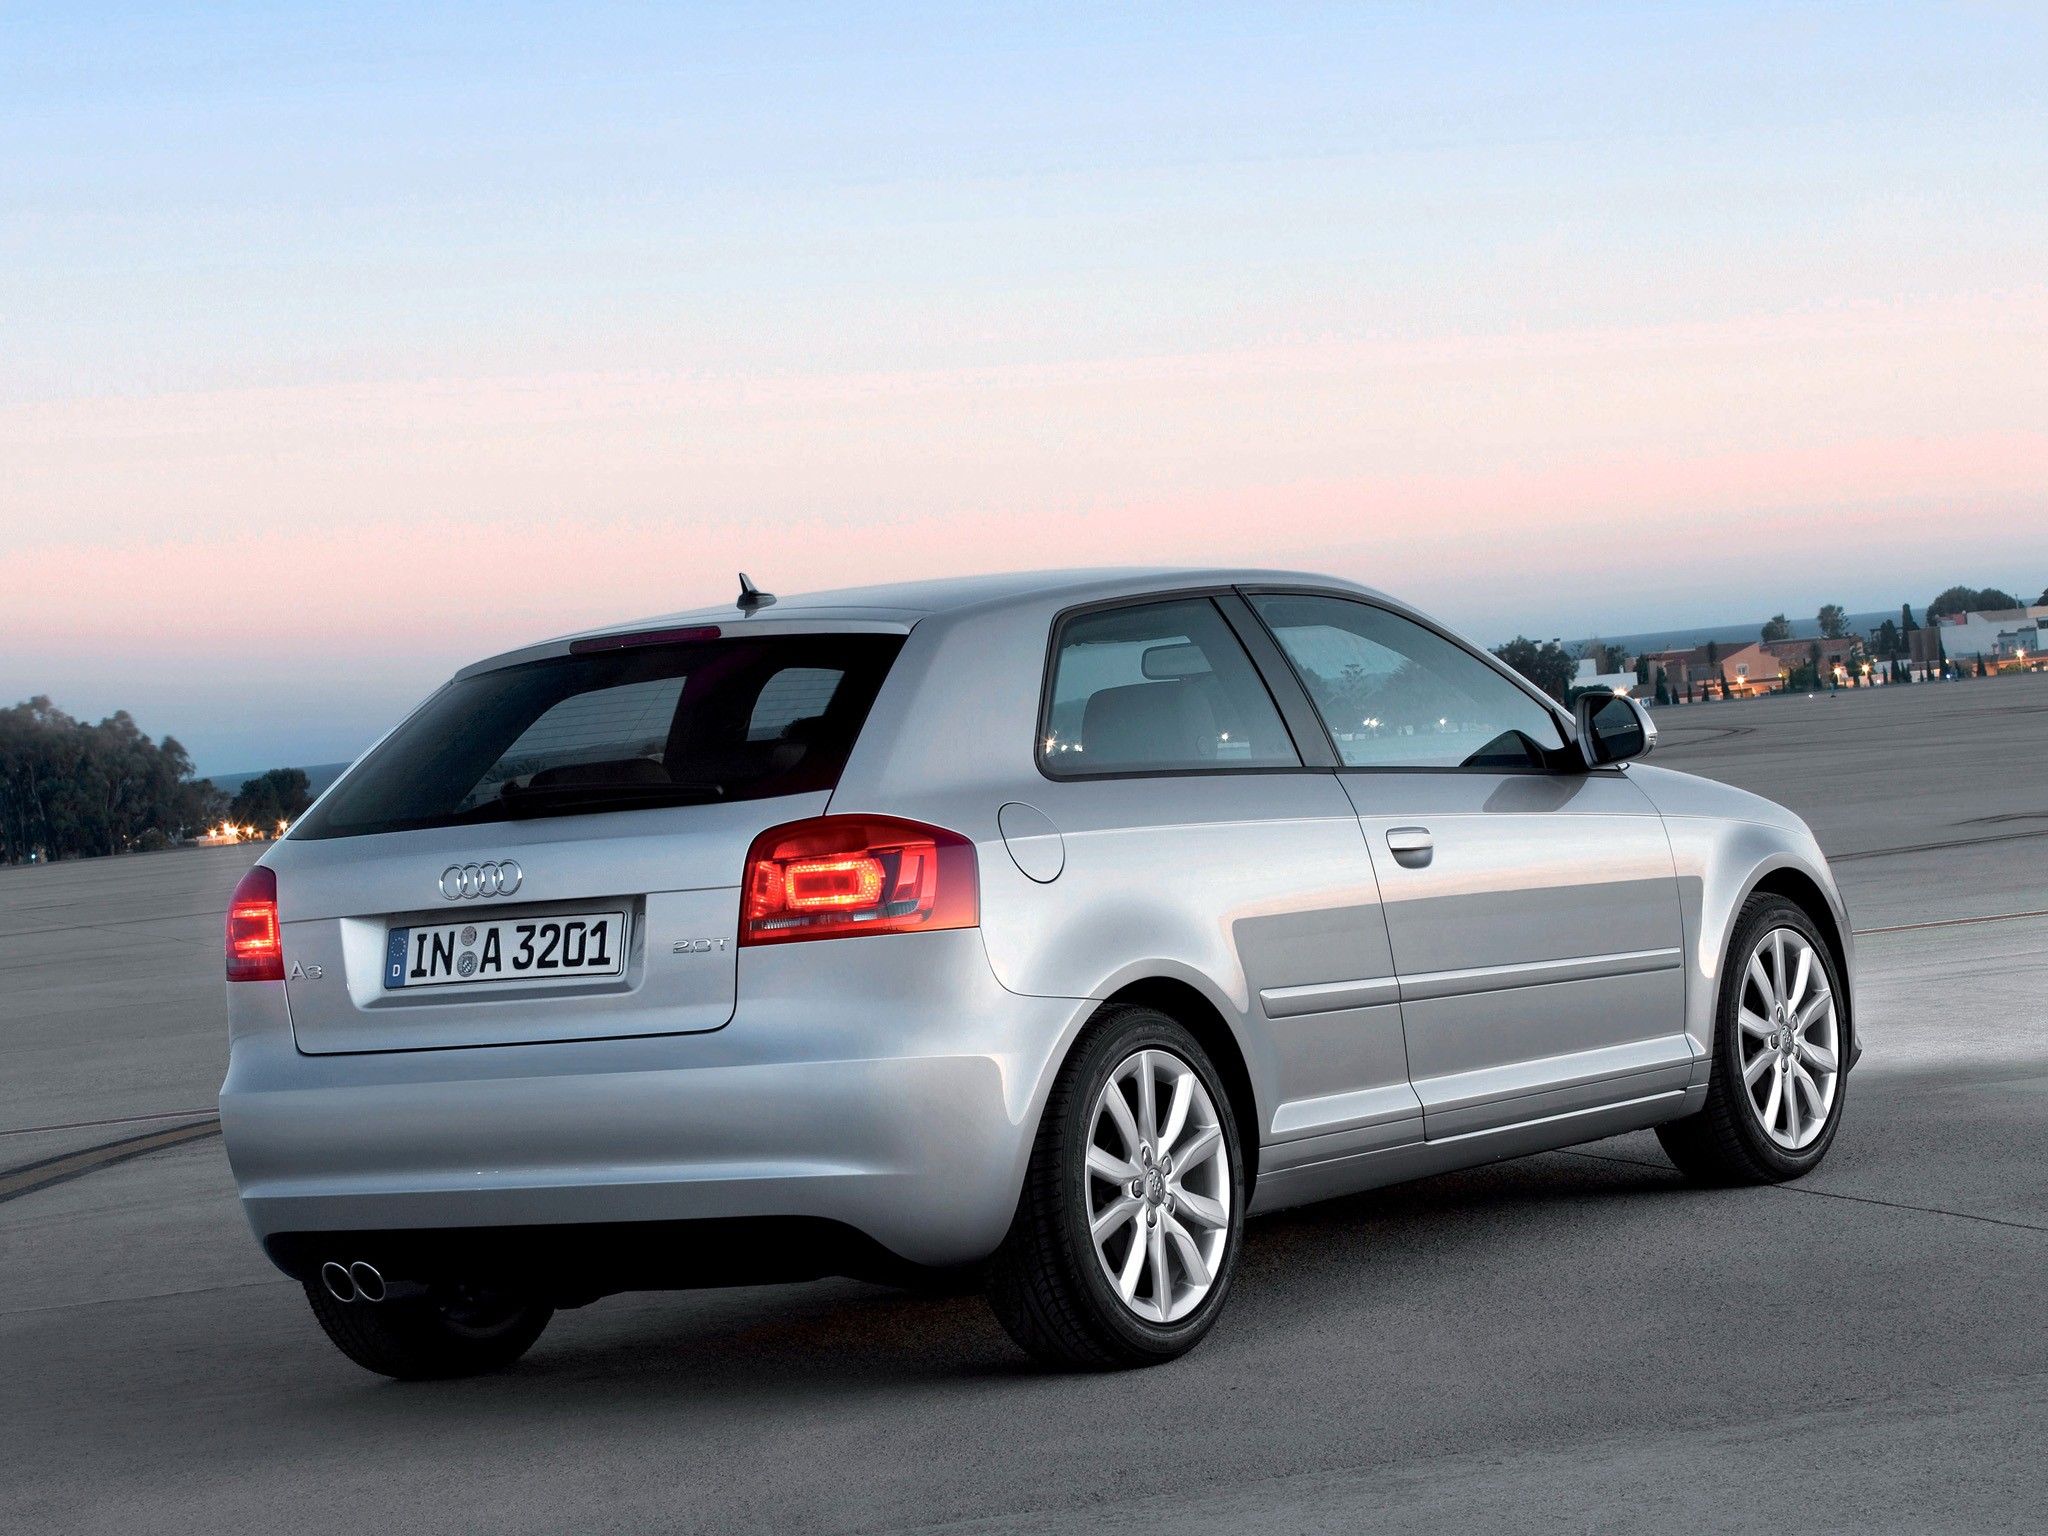 Audi A3 8P 1.4 TFSI Attraction S tronic 2008-2011